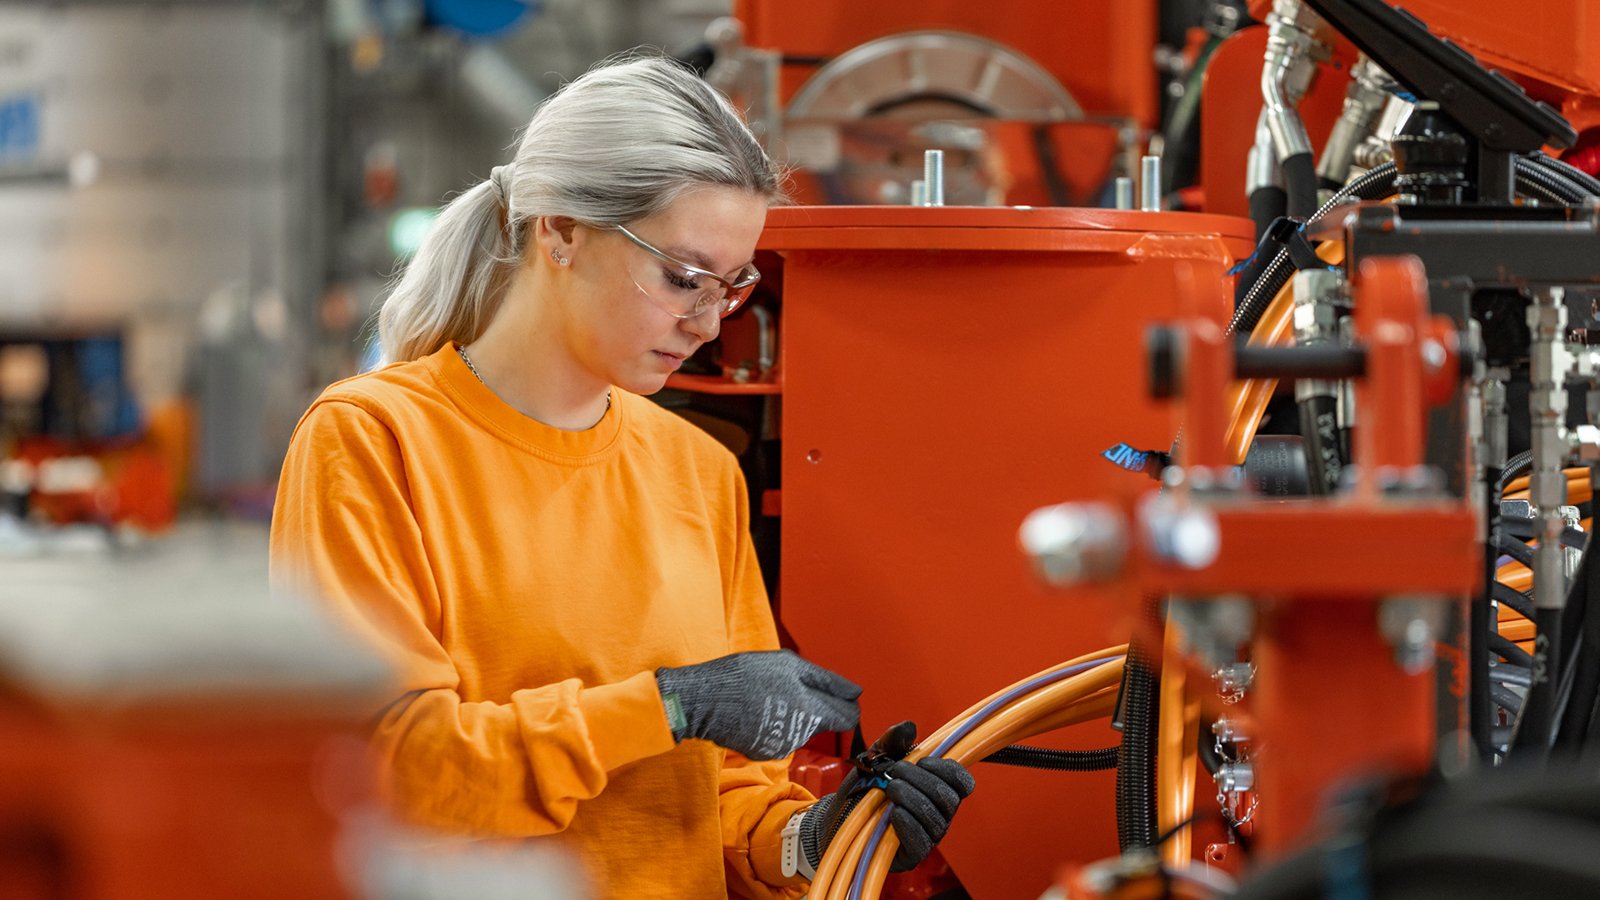 A woman in work clothes putting together machine cables in an industrial environment